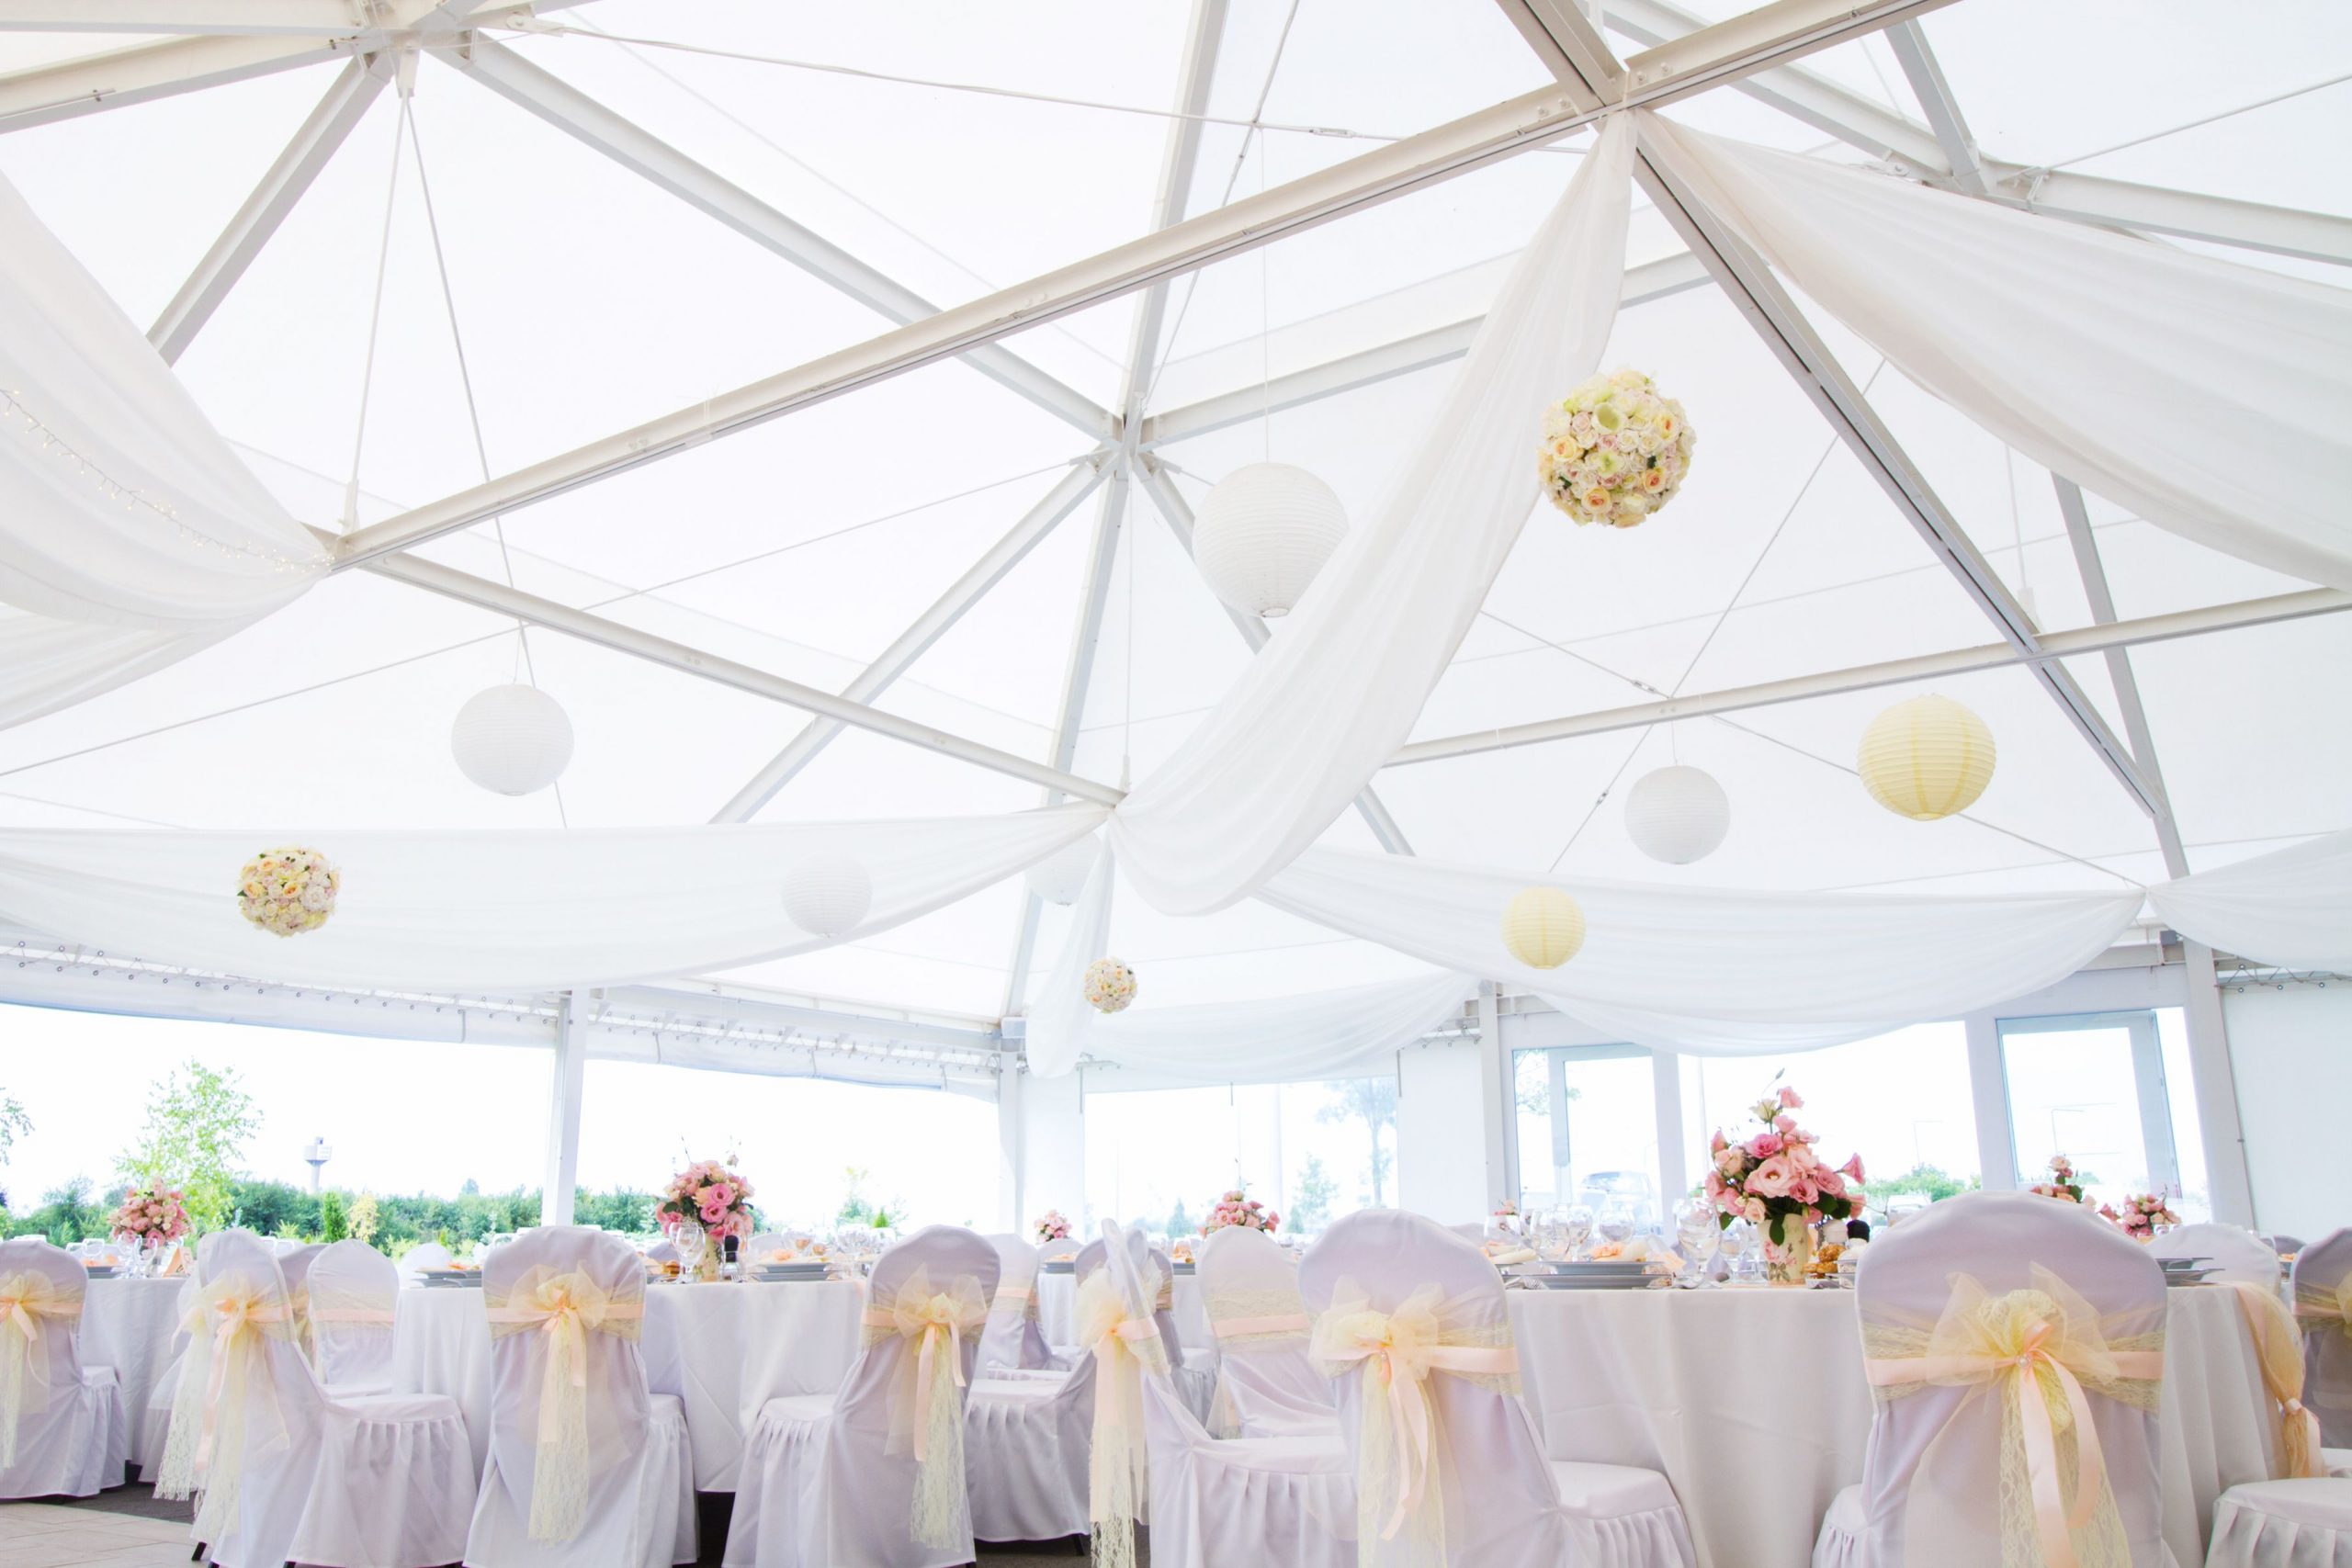 Top 6 things to be considered before hiring a Stretch Tent